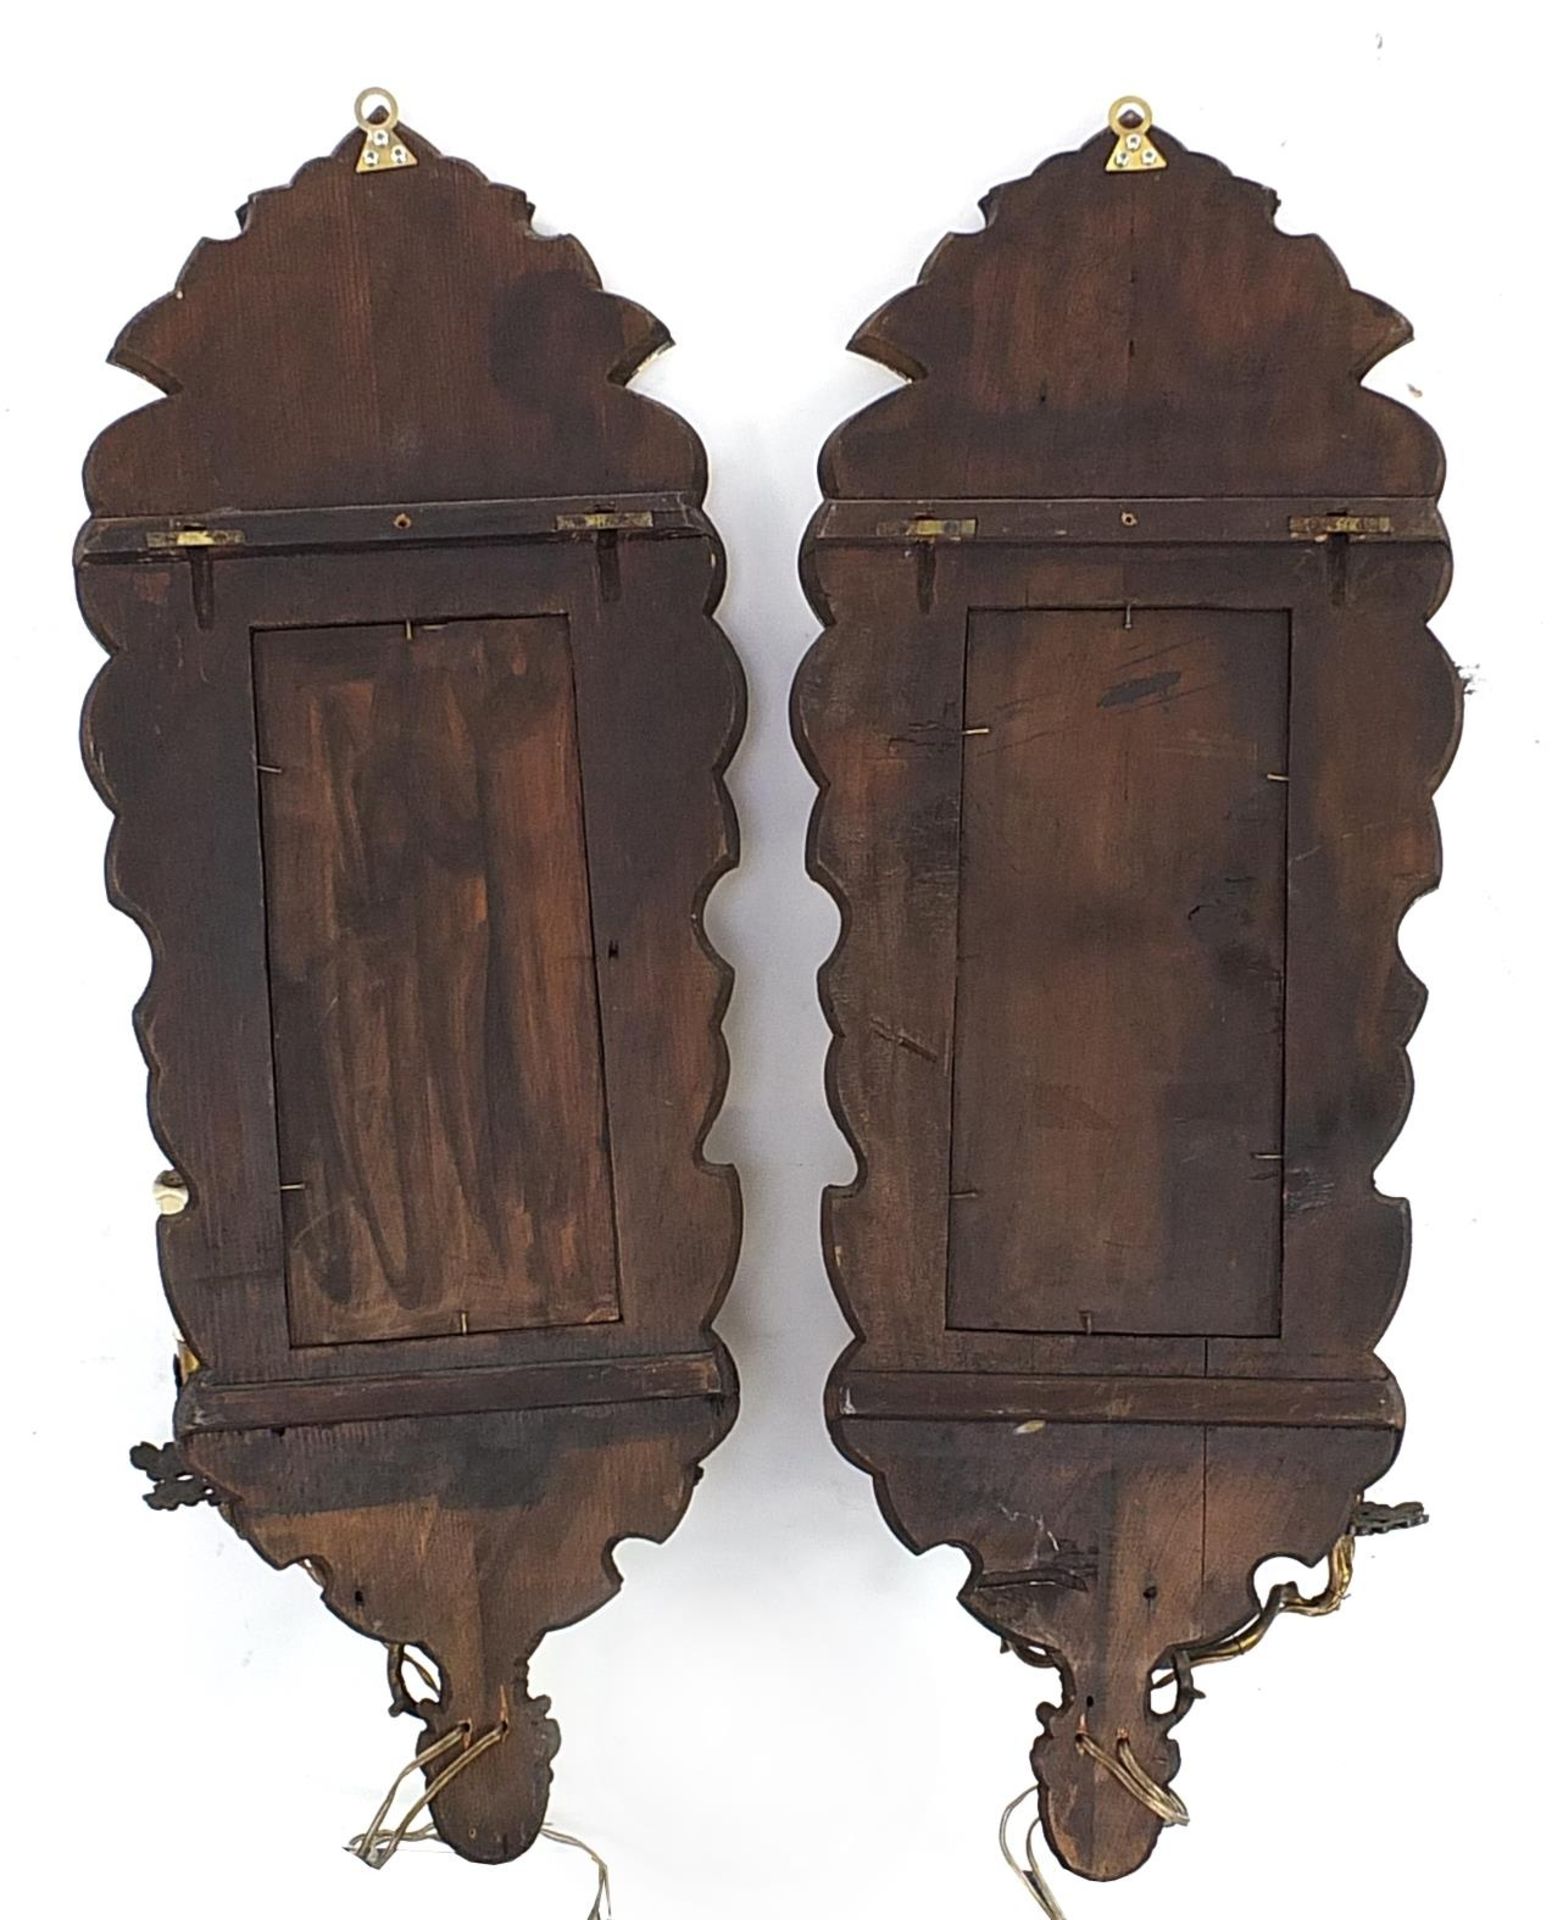 Pair of 19th century Venetian glass and gilt metal two branch mirrored wall sconces gilded with - Image 2 of 2